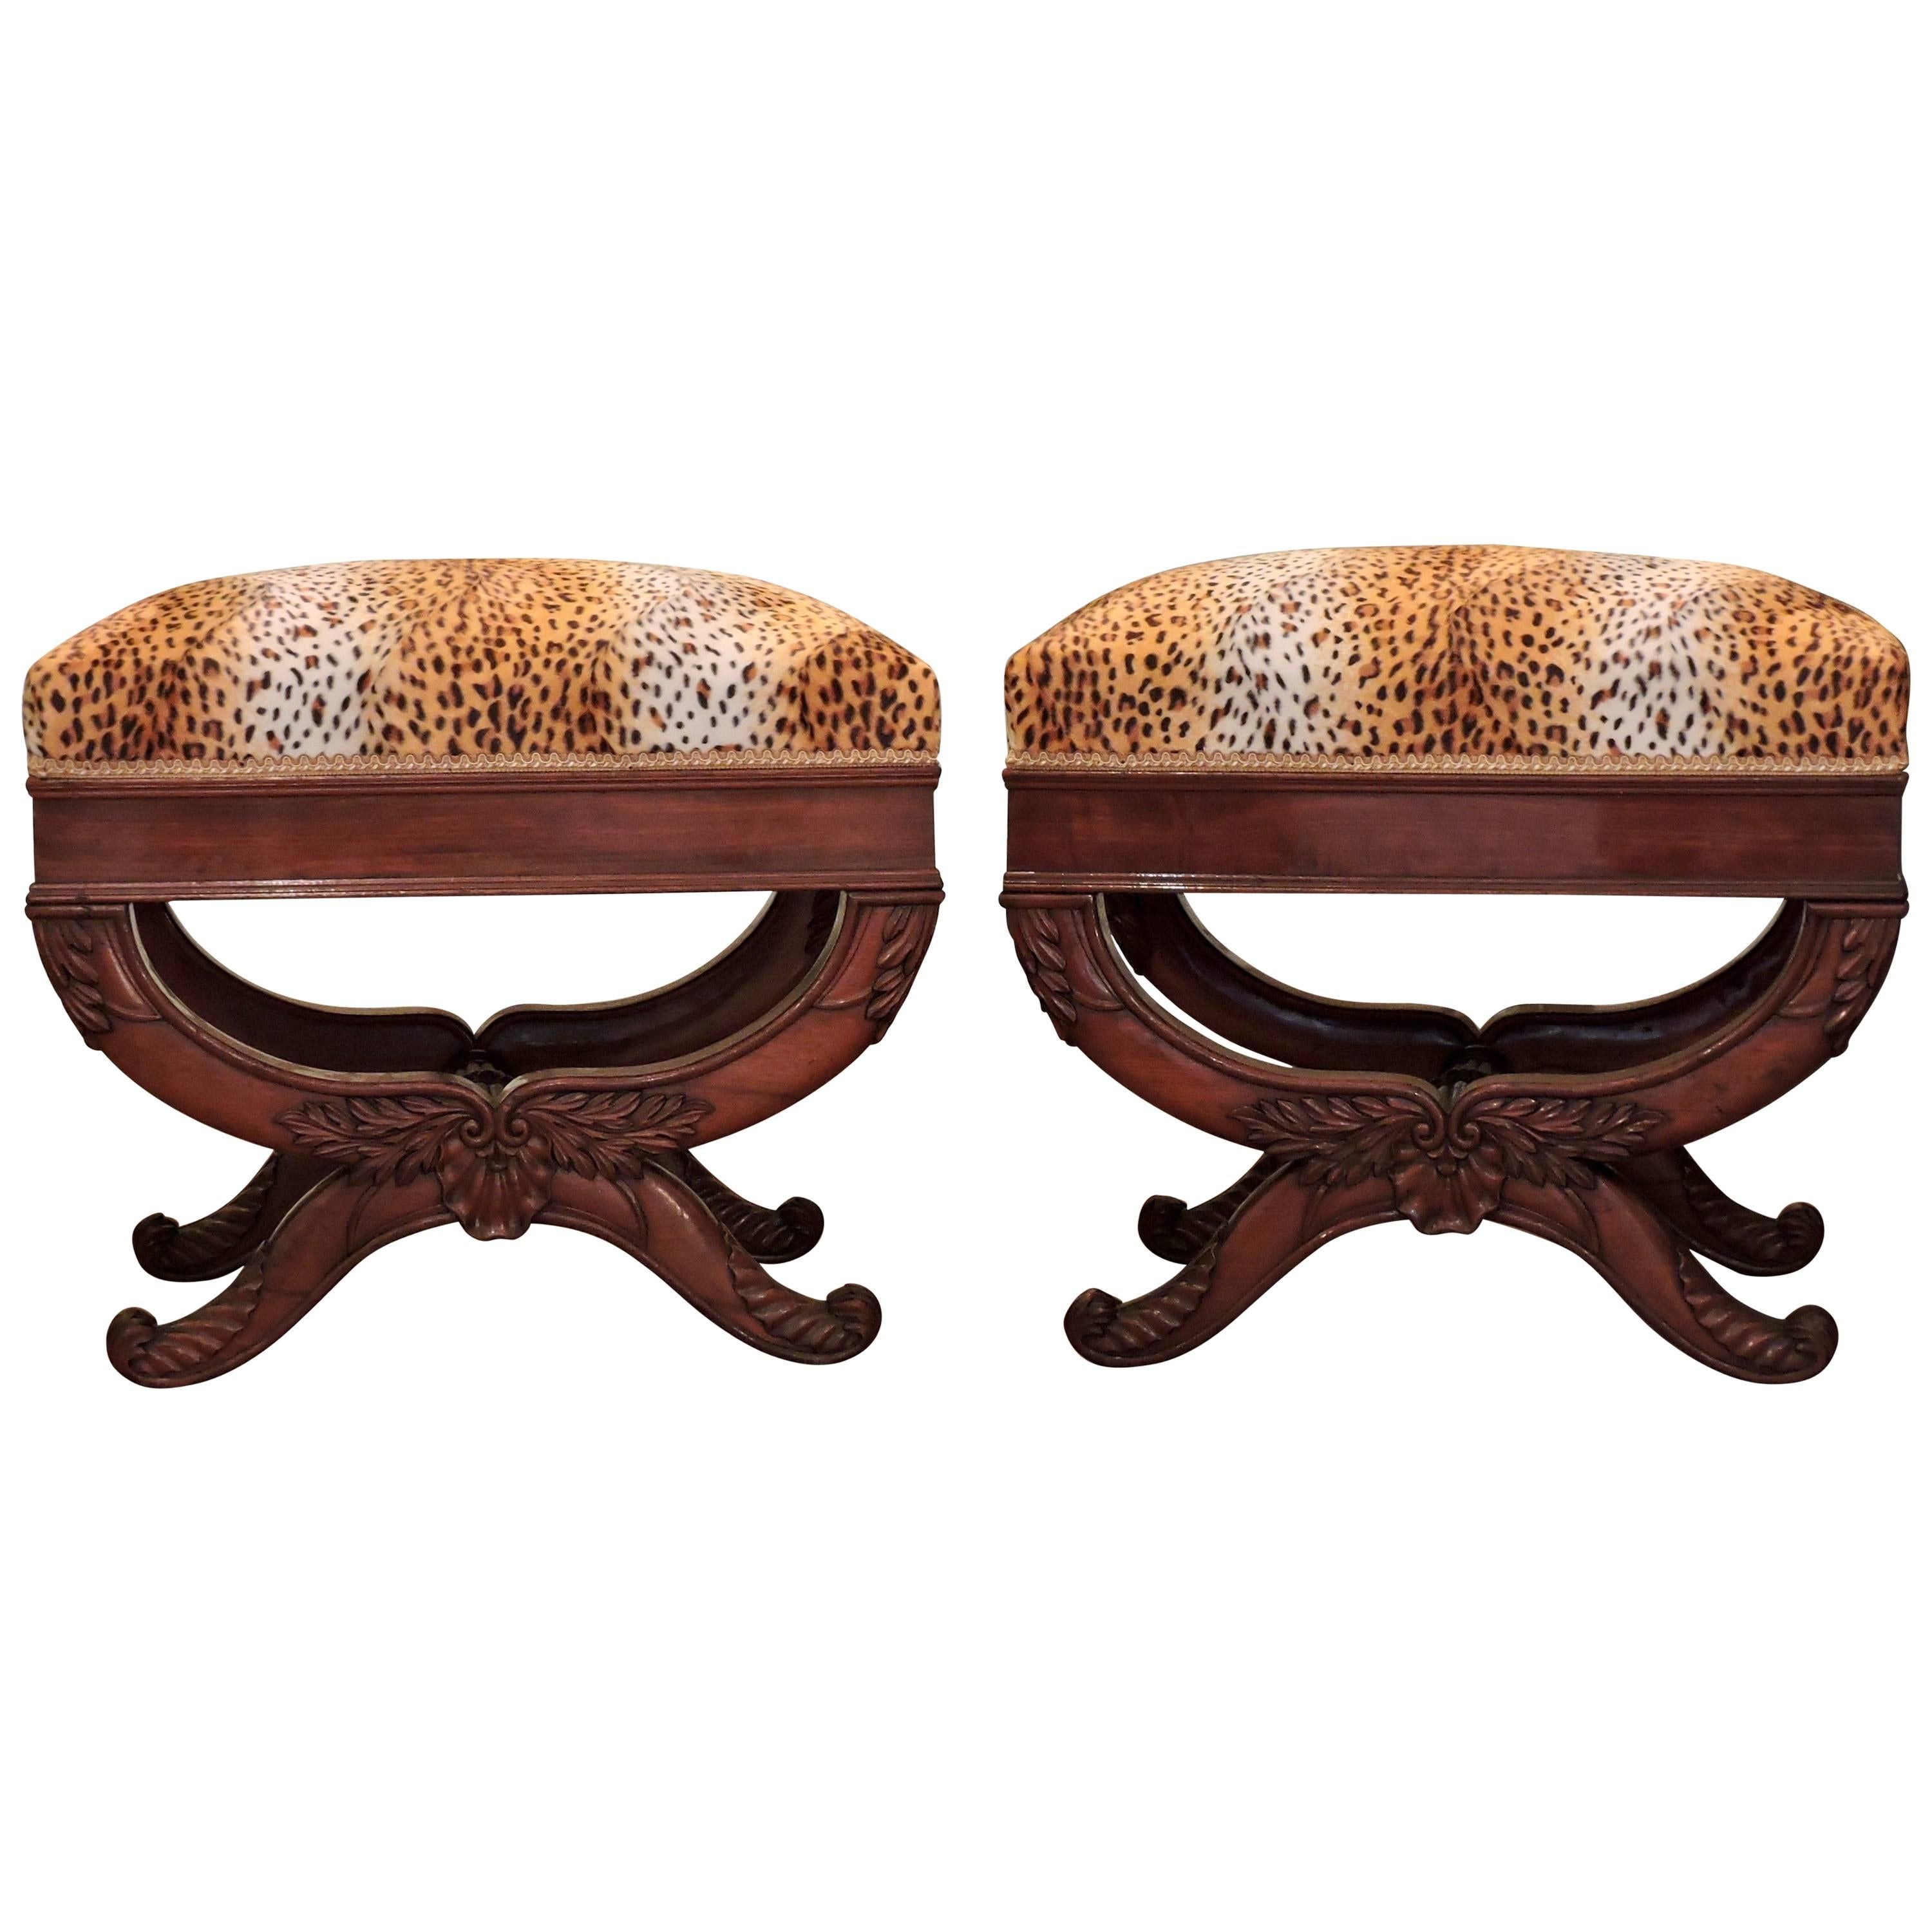 Pair of Empire French Curule Stools